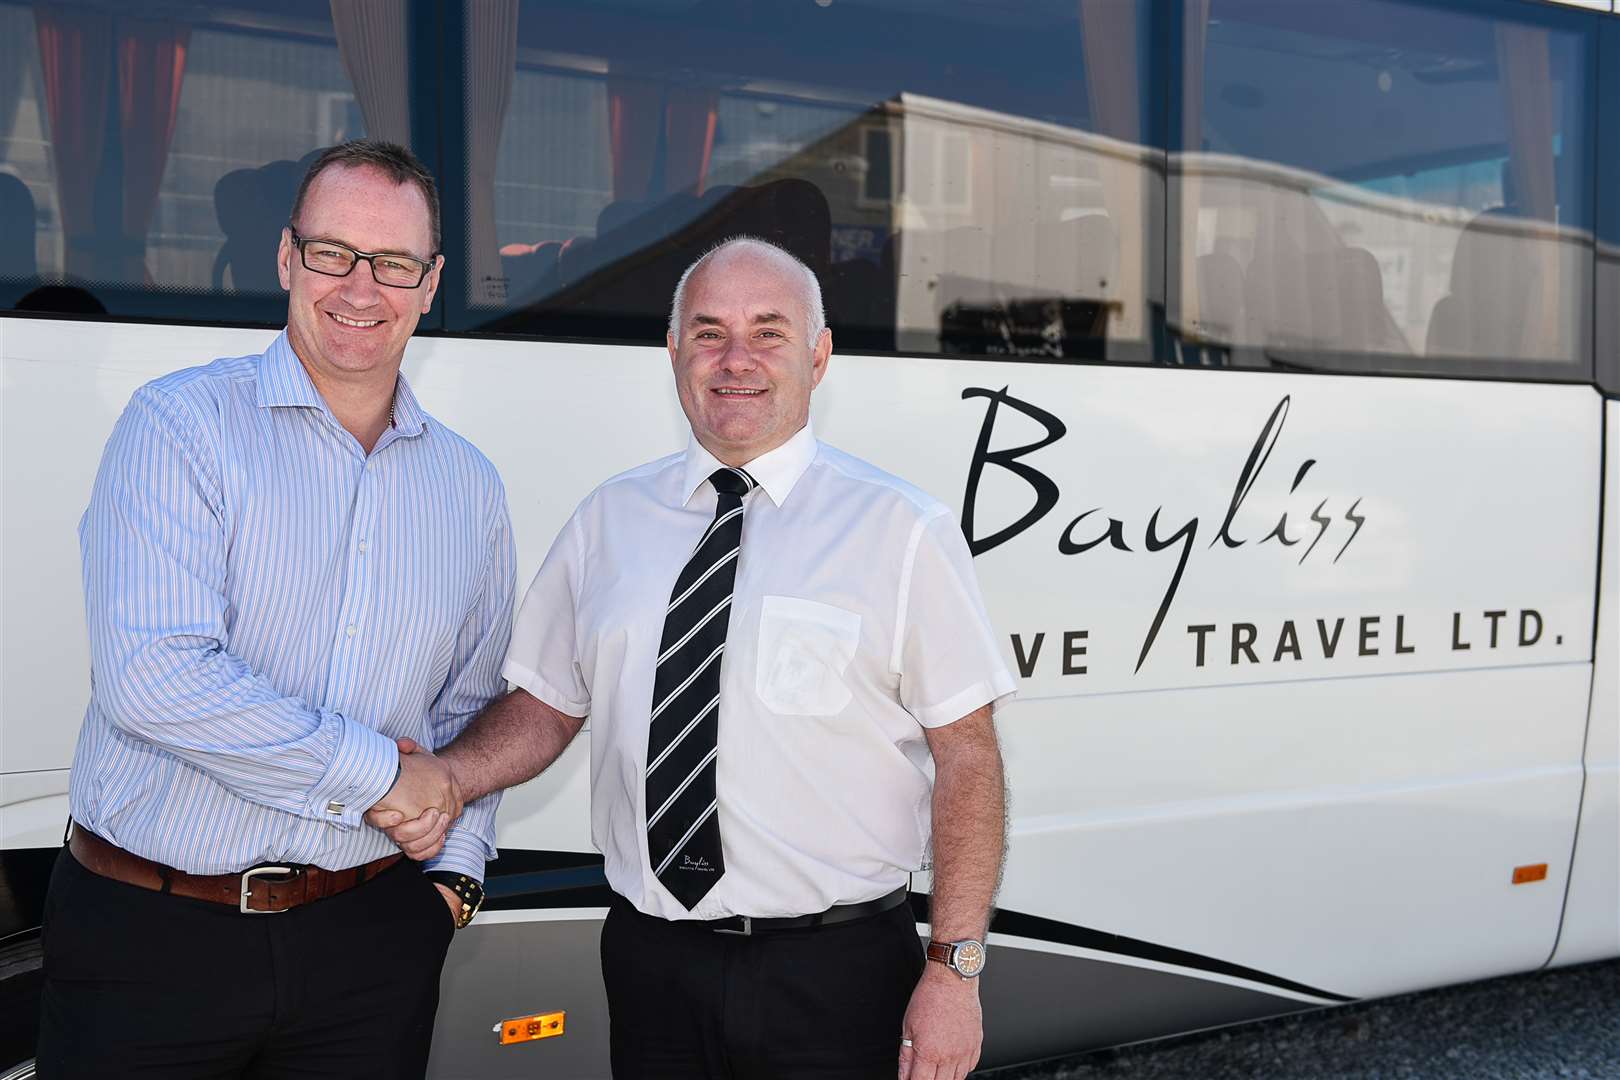 Bayliss Executive Travel has started day trips and UK and European holidays. Managing director Alistair Bayliss with commercial and marketing manager Paul Jeffries